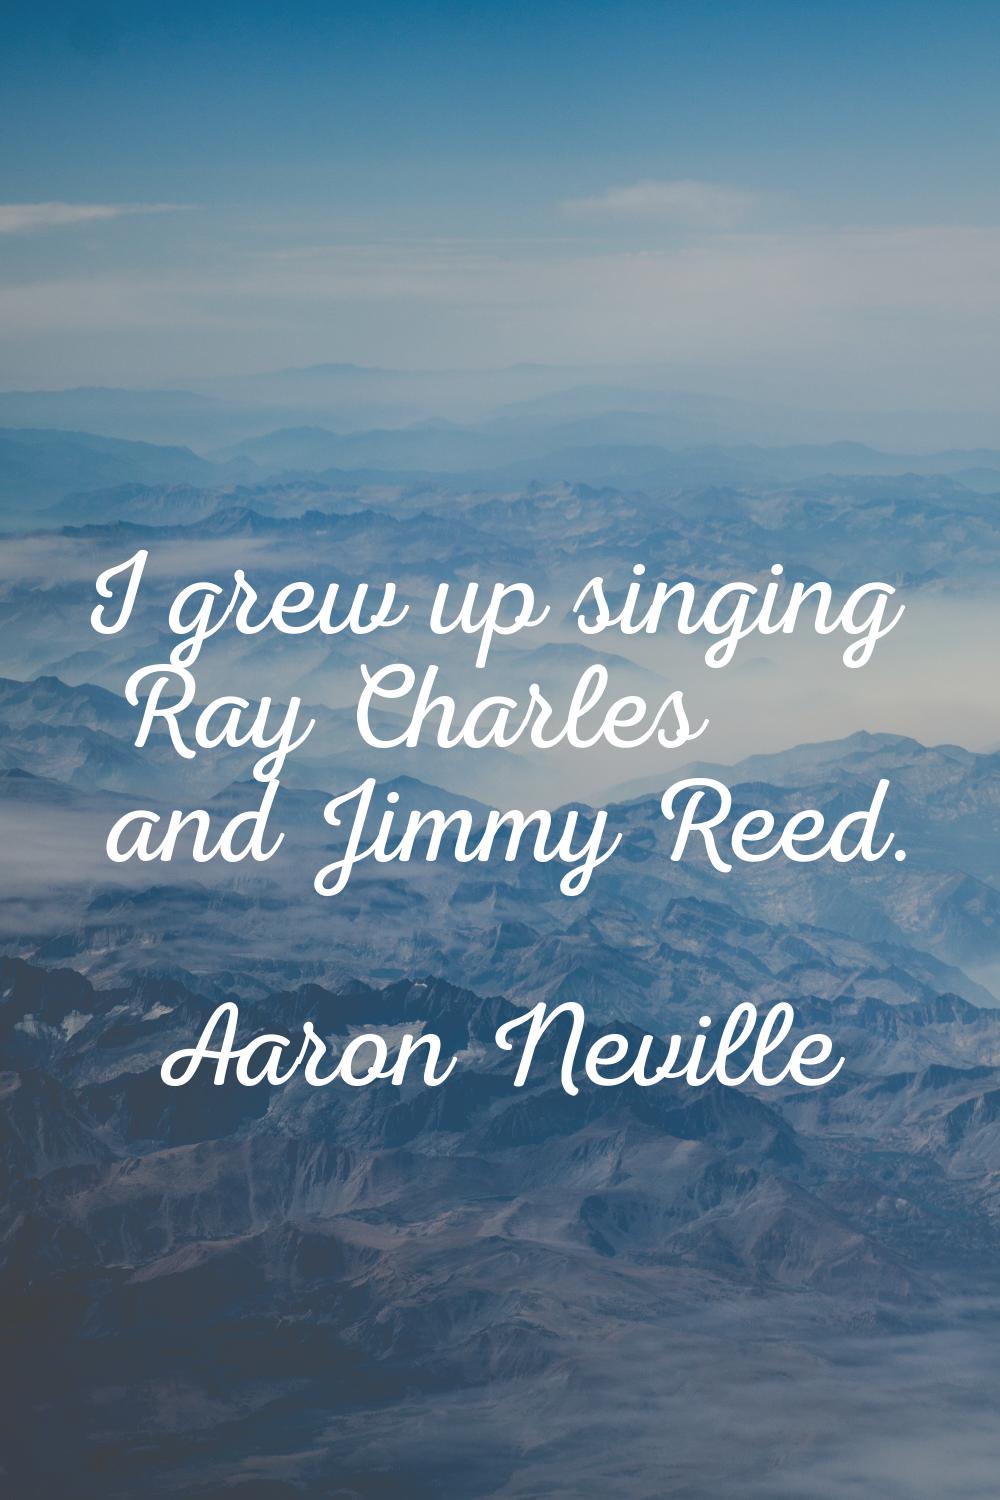 I grew up singing Ray Charles and Jimmy Reed.